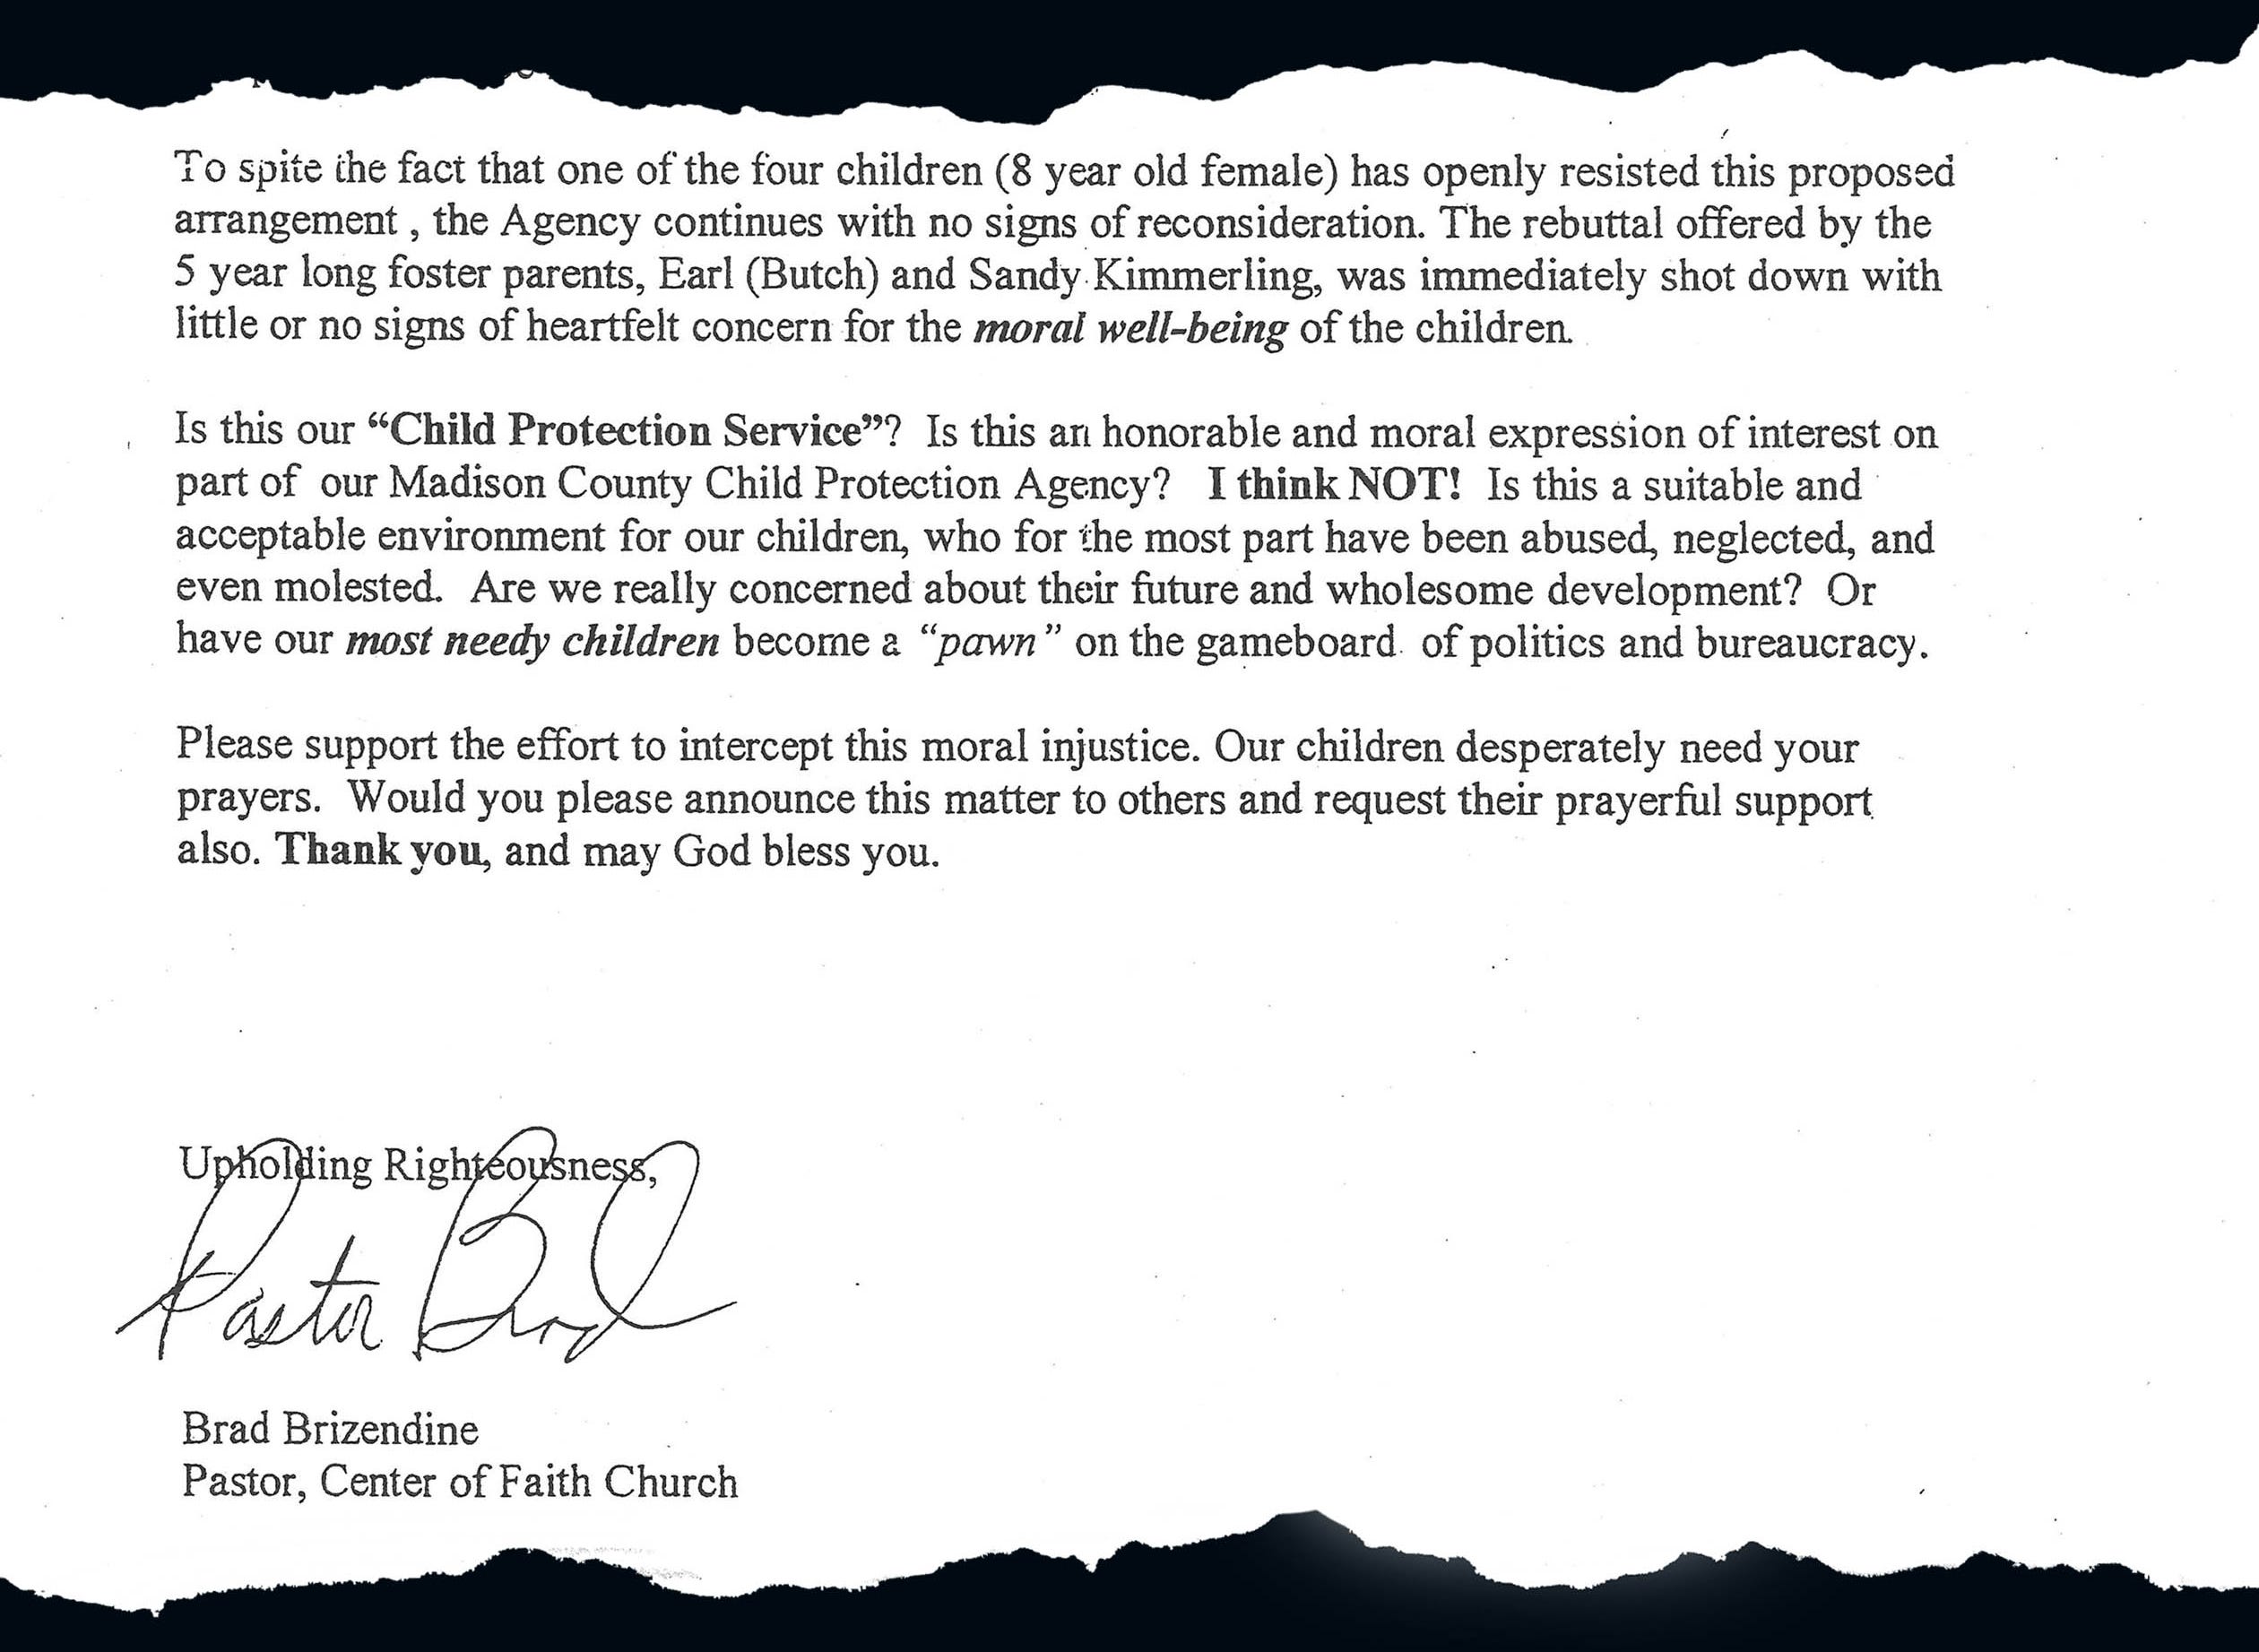 A portion of the letter Brad Brizendine, pastor of Center of Faith Church, sent to area churches.